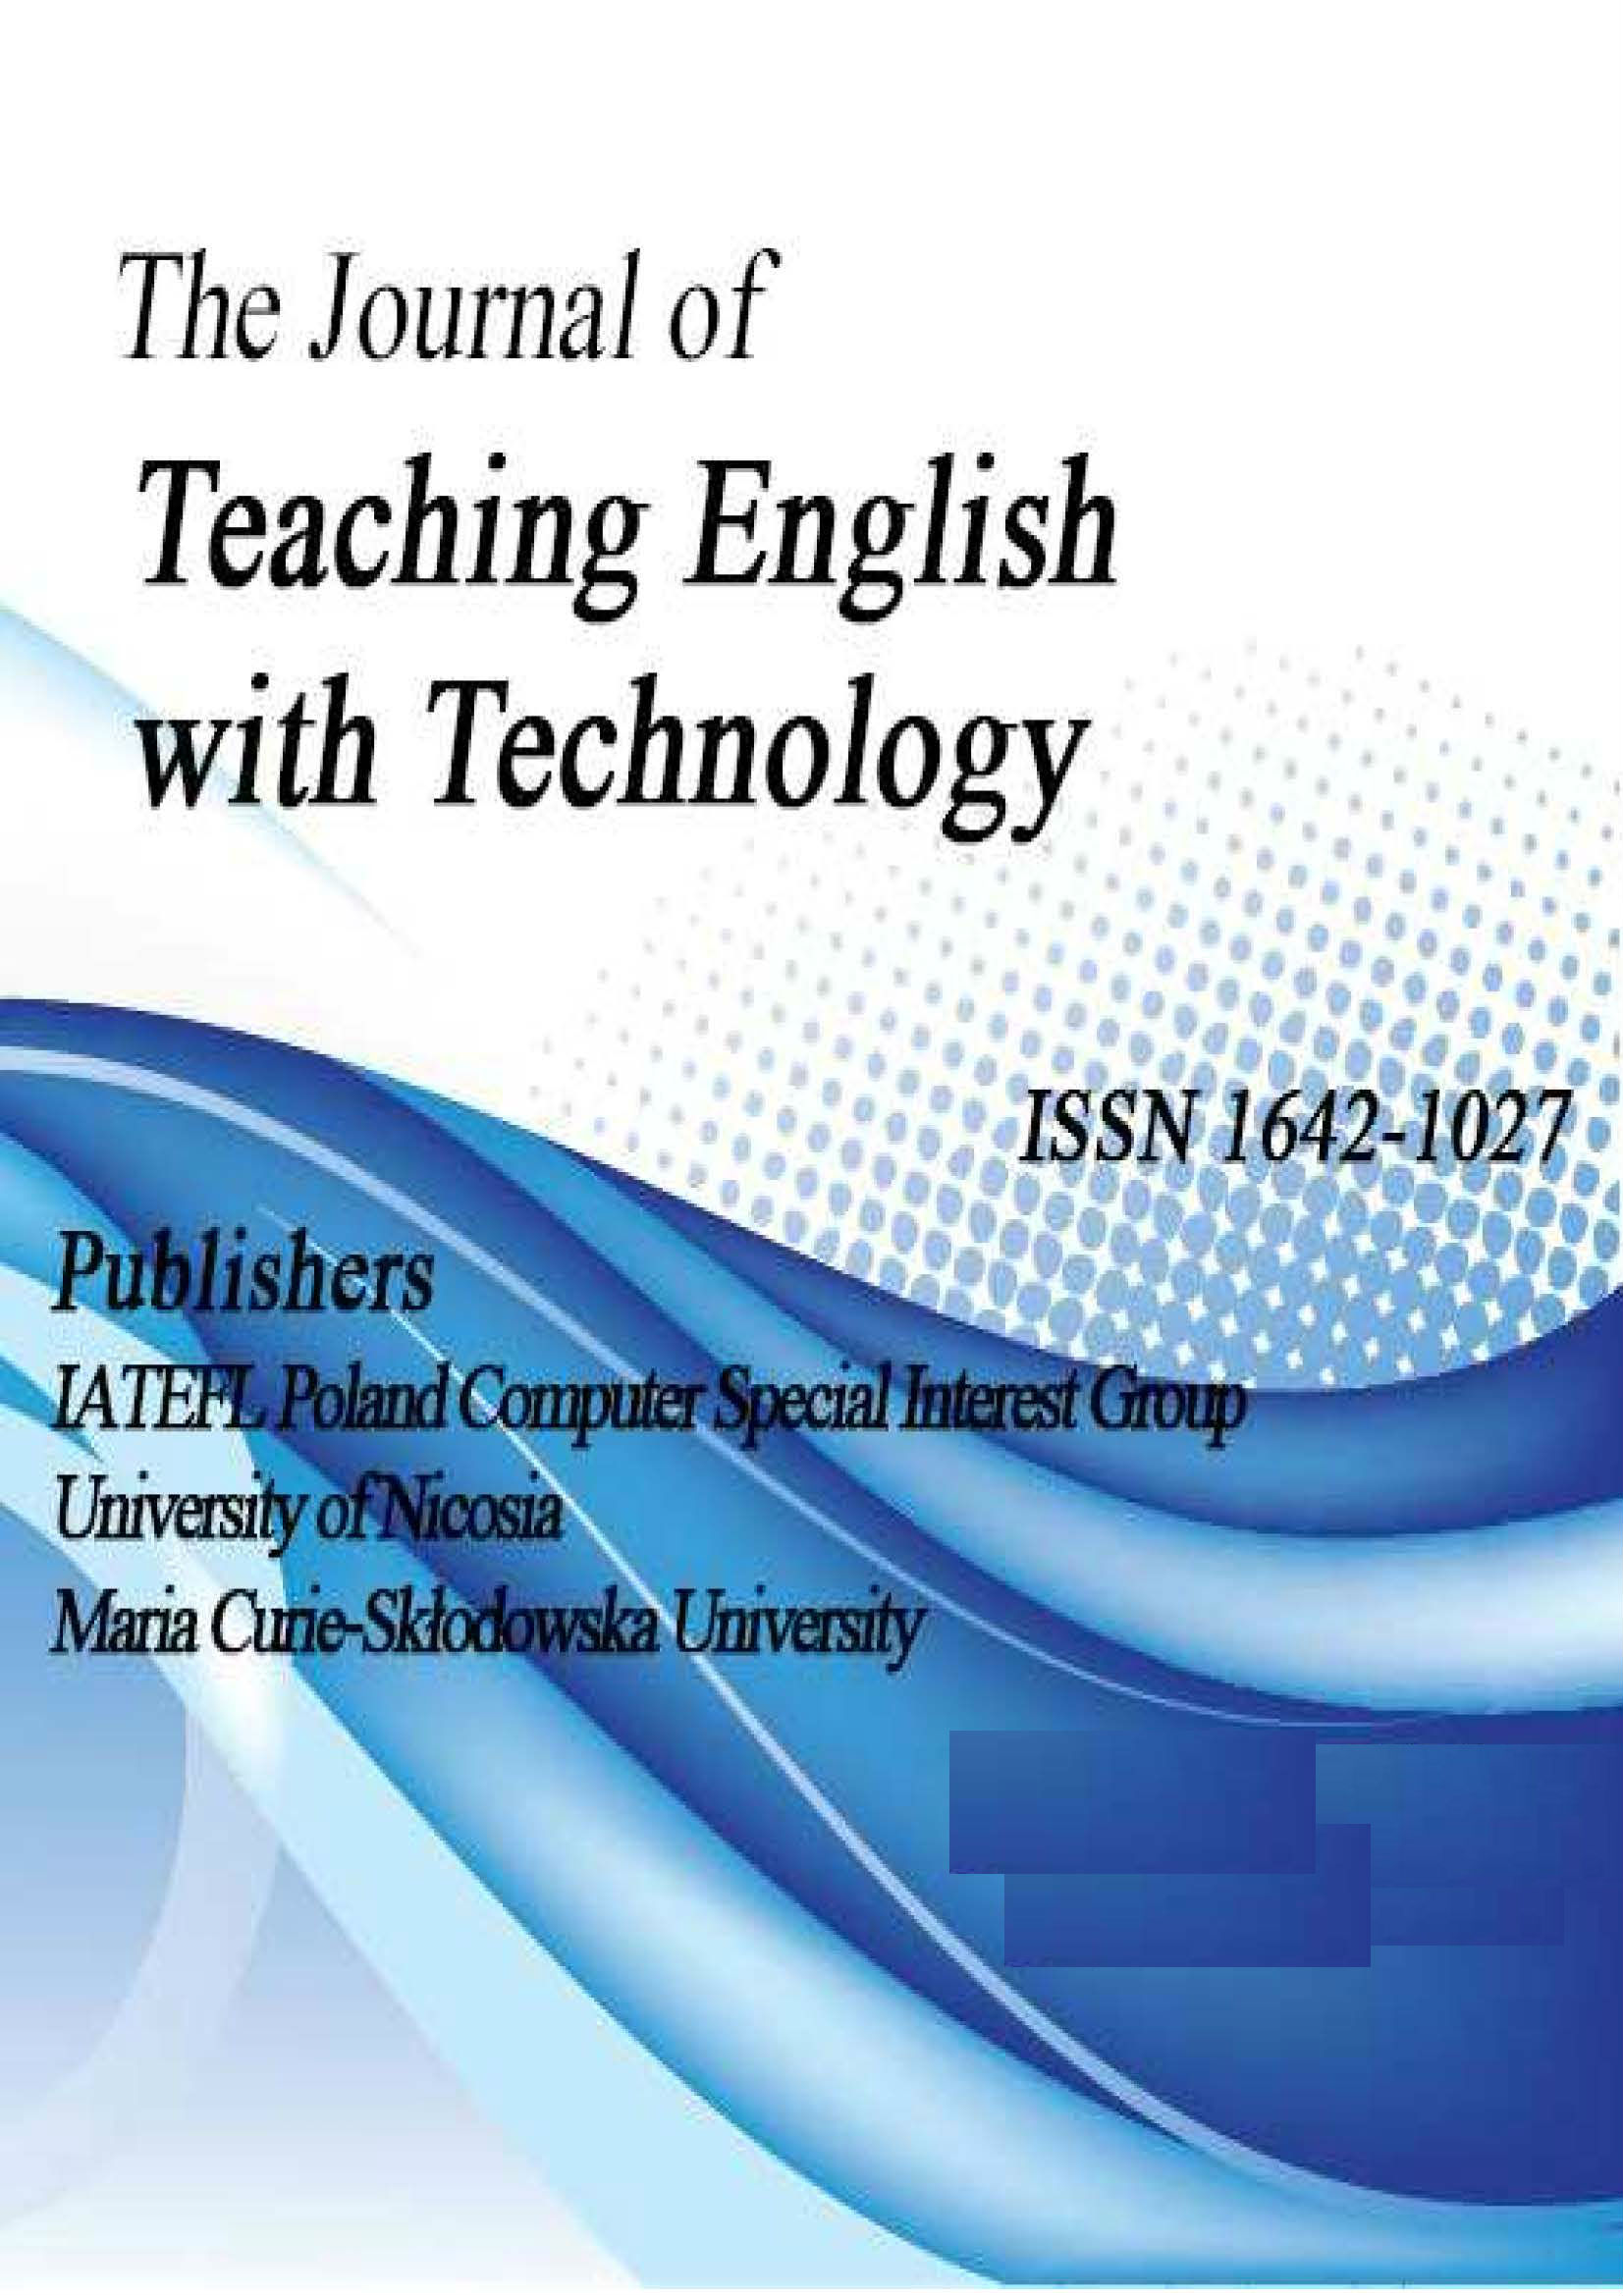 BEST PRACTICES IN USING VIDEO TECHNOLOGY TO PROMOTE SECOND LANGUAGE ACQUISITION Cover Image